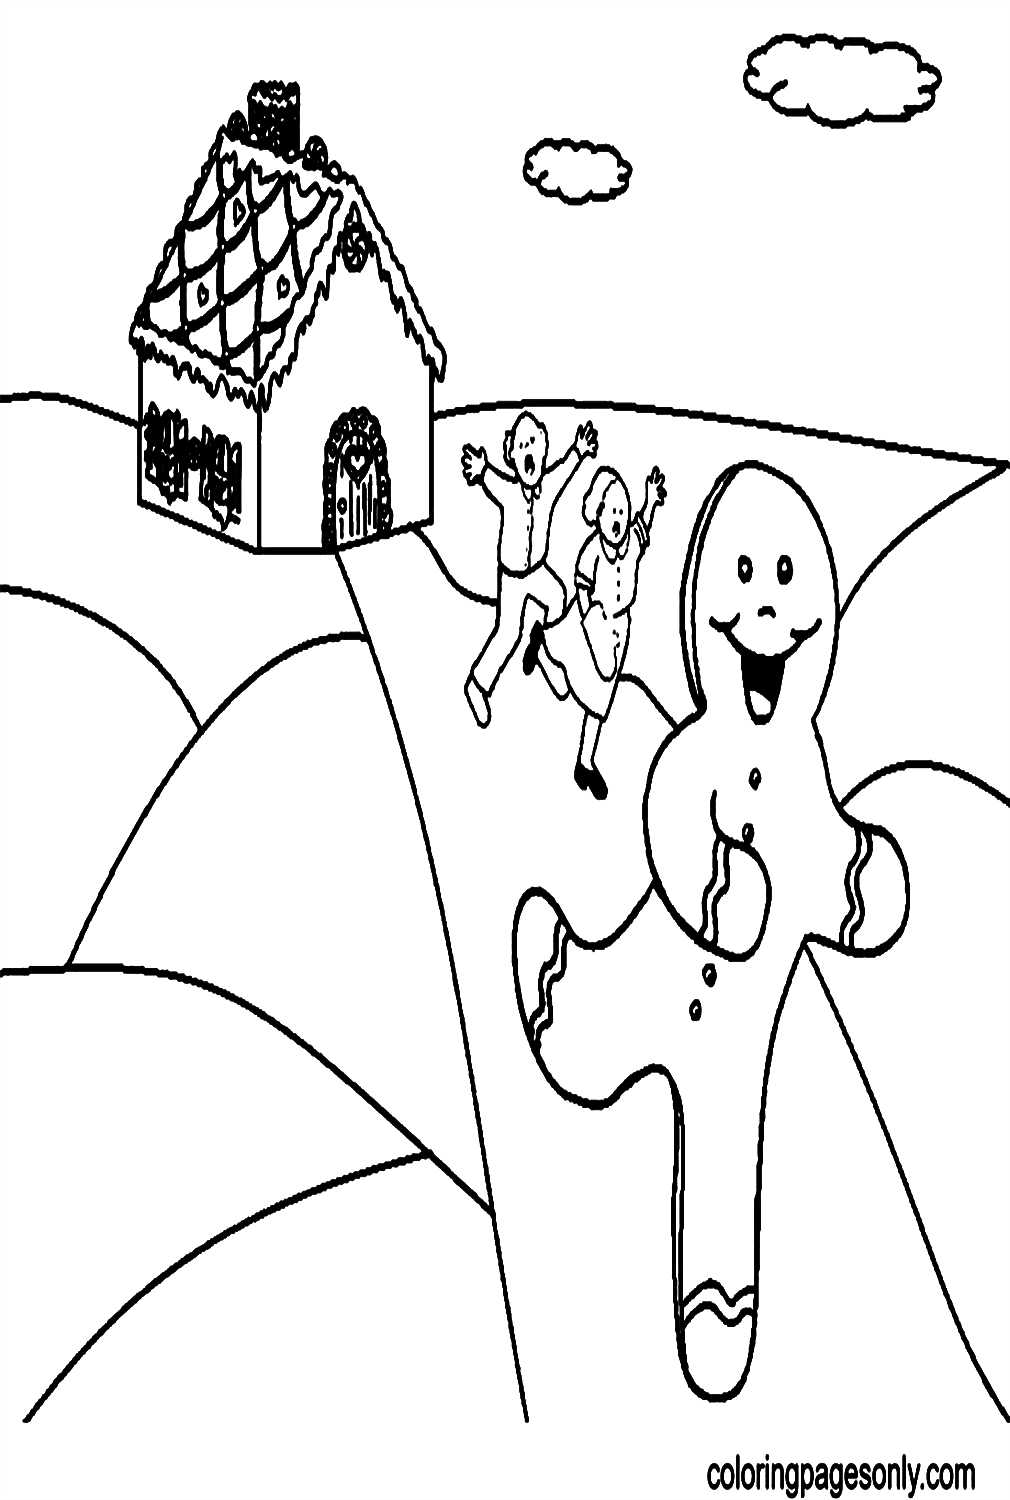 A Woman And A Man Chasing Gingerbread Man Coloring Pages